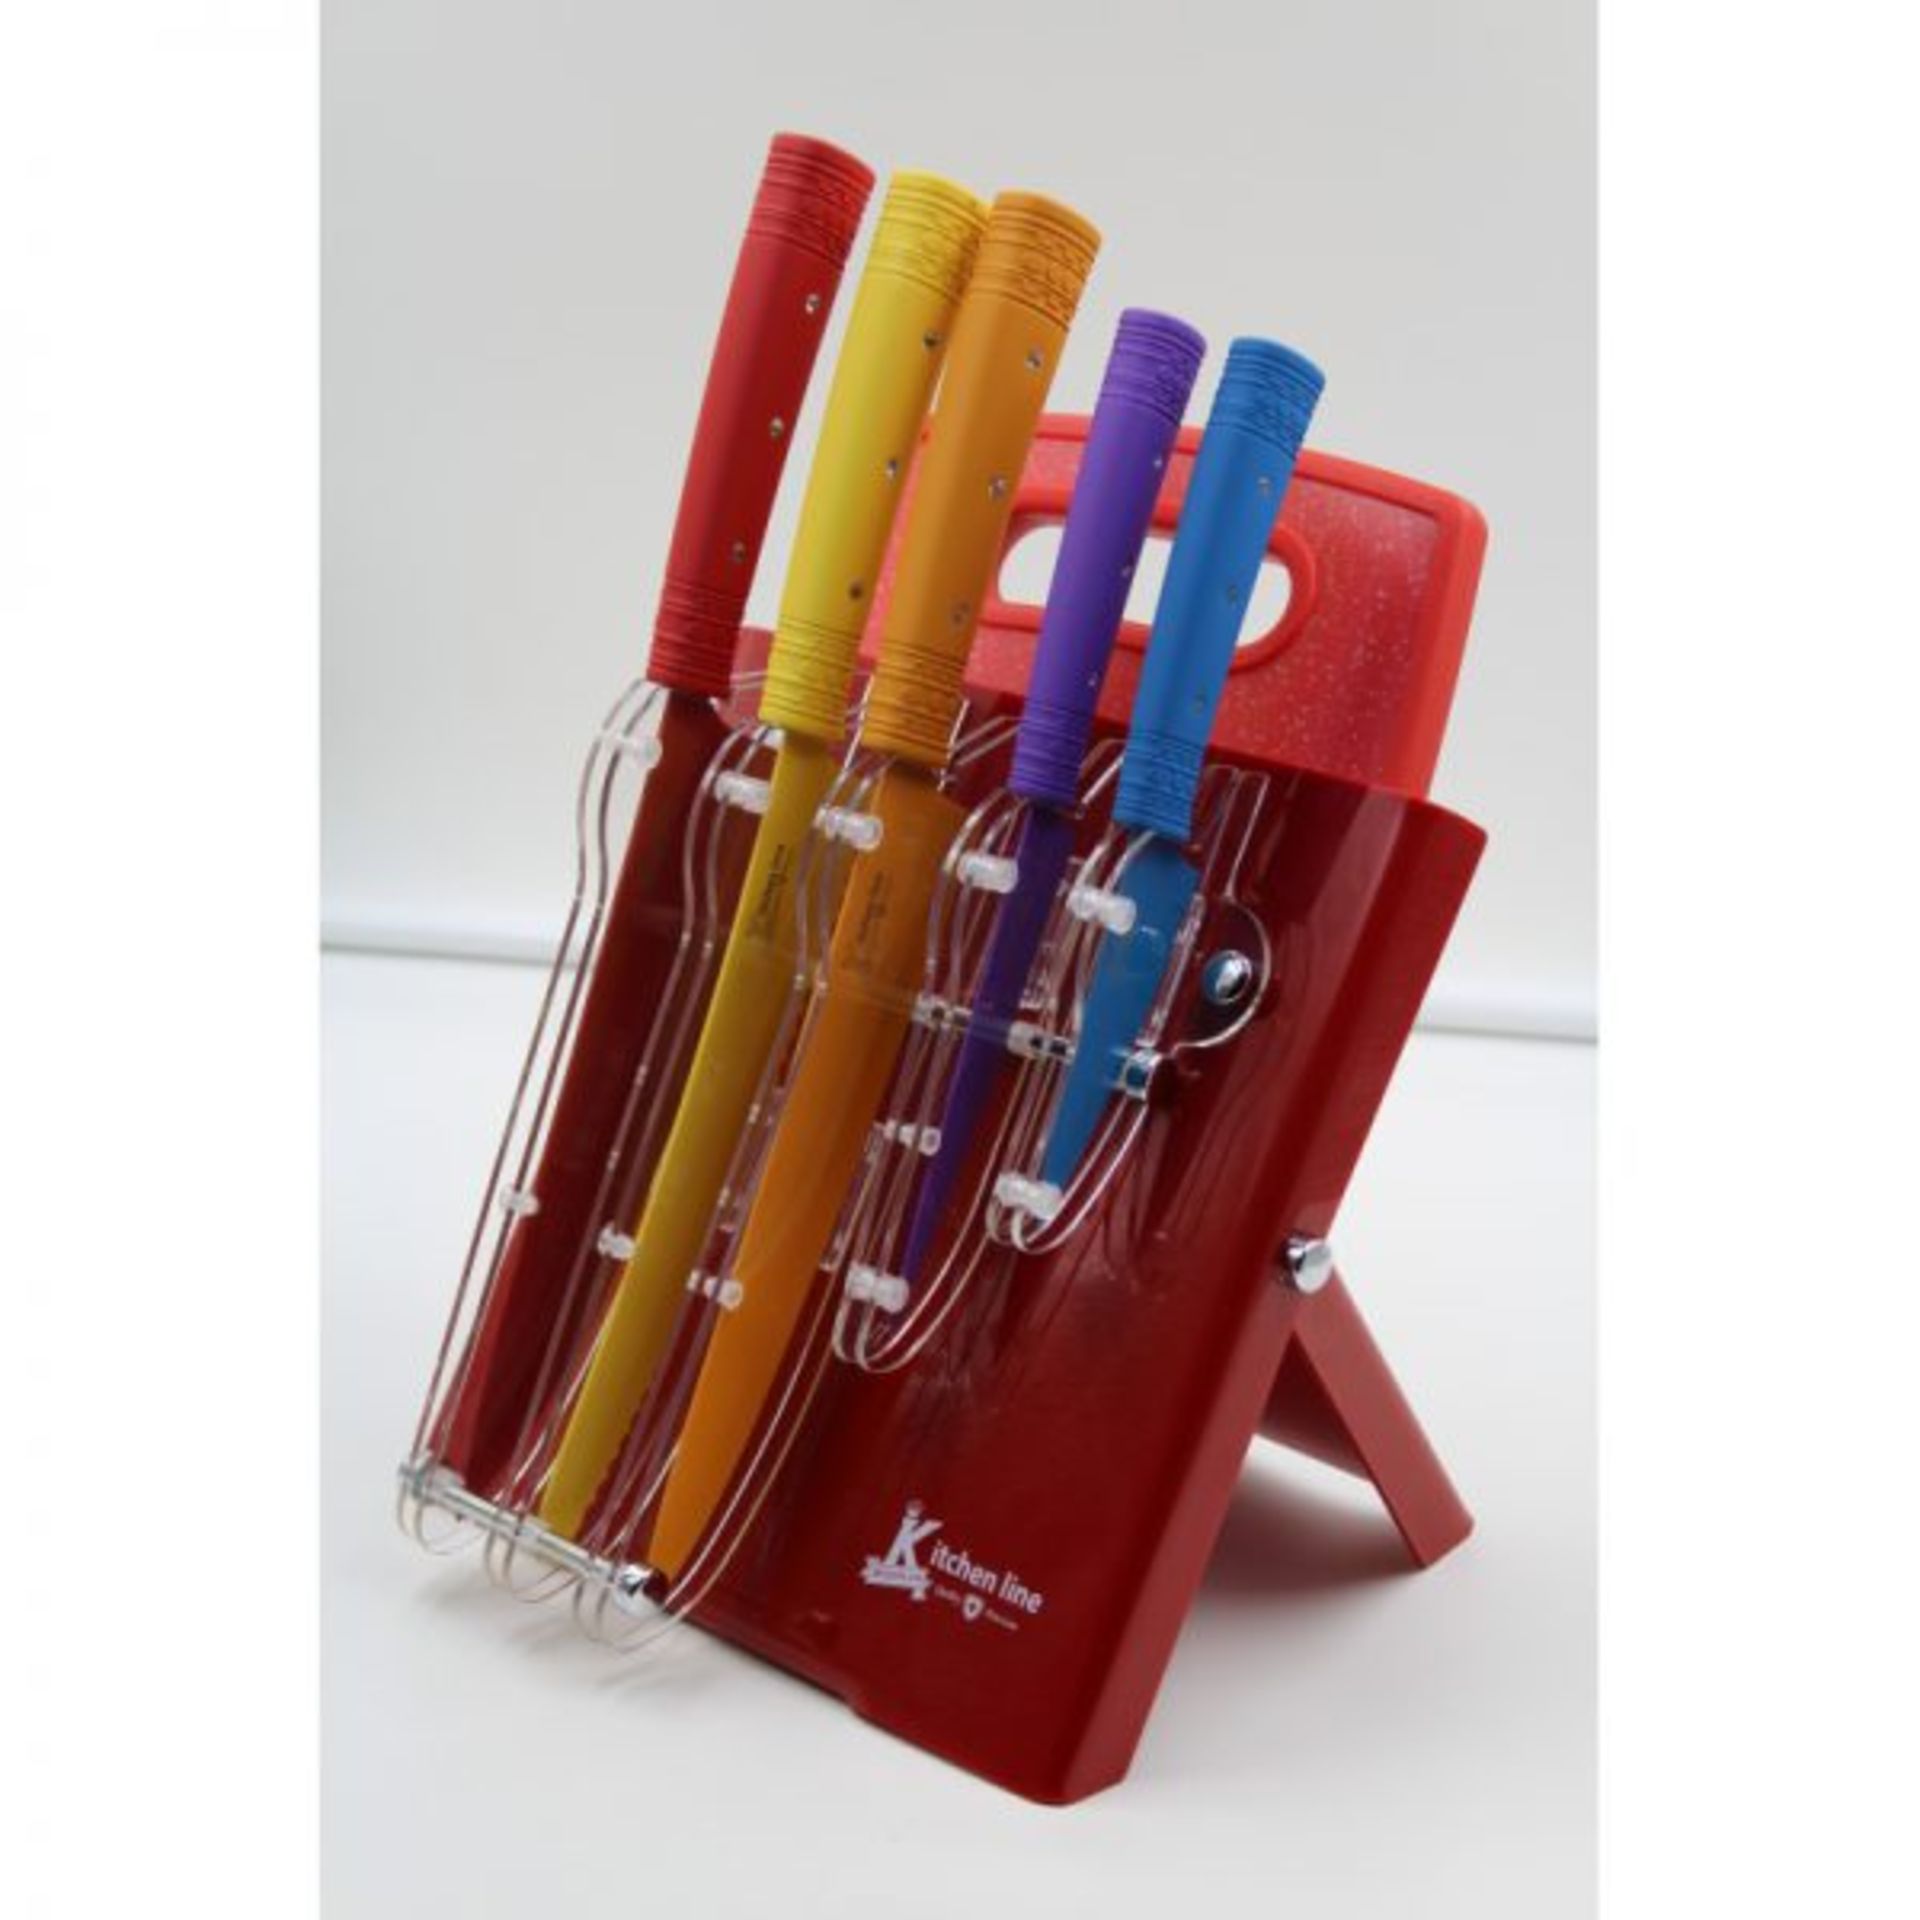 V Brand New Kitchen Line Switzerland 7 Piece Knife Set With Acrylic Stand Includes 8" Chef Knife/